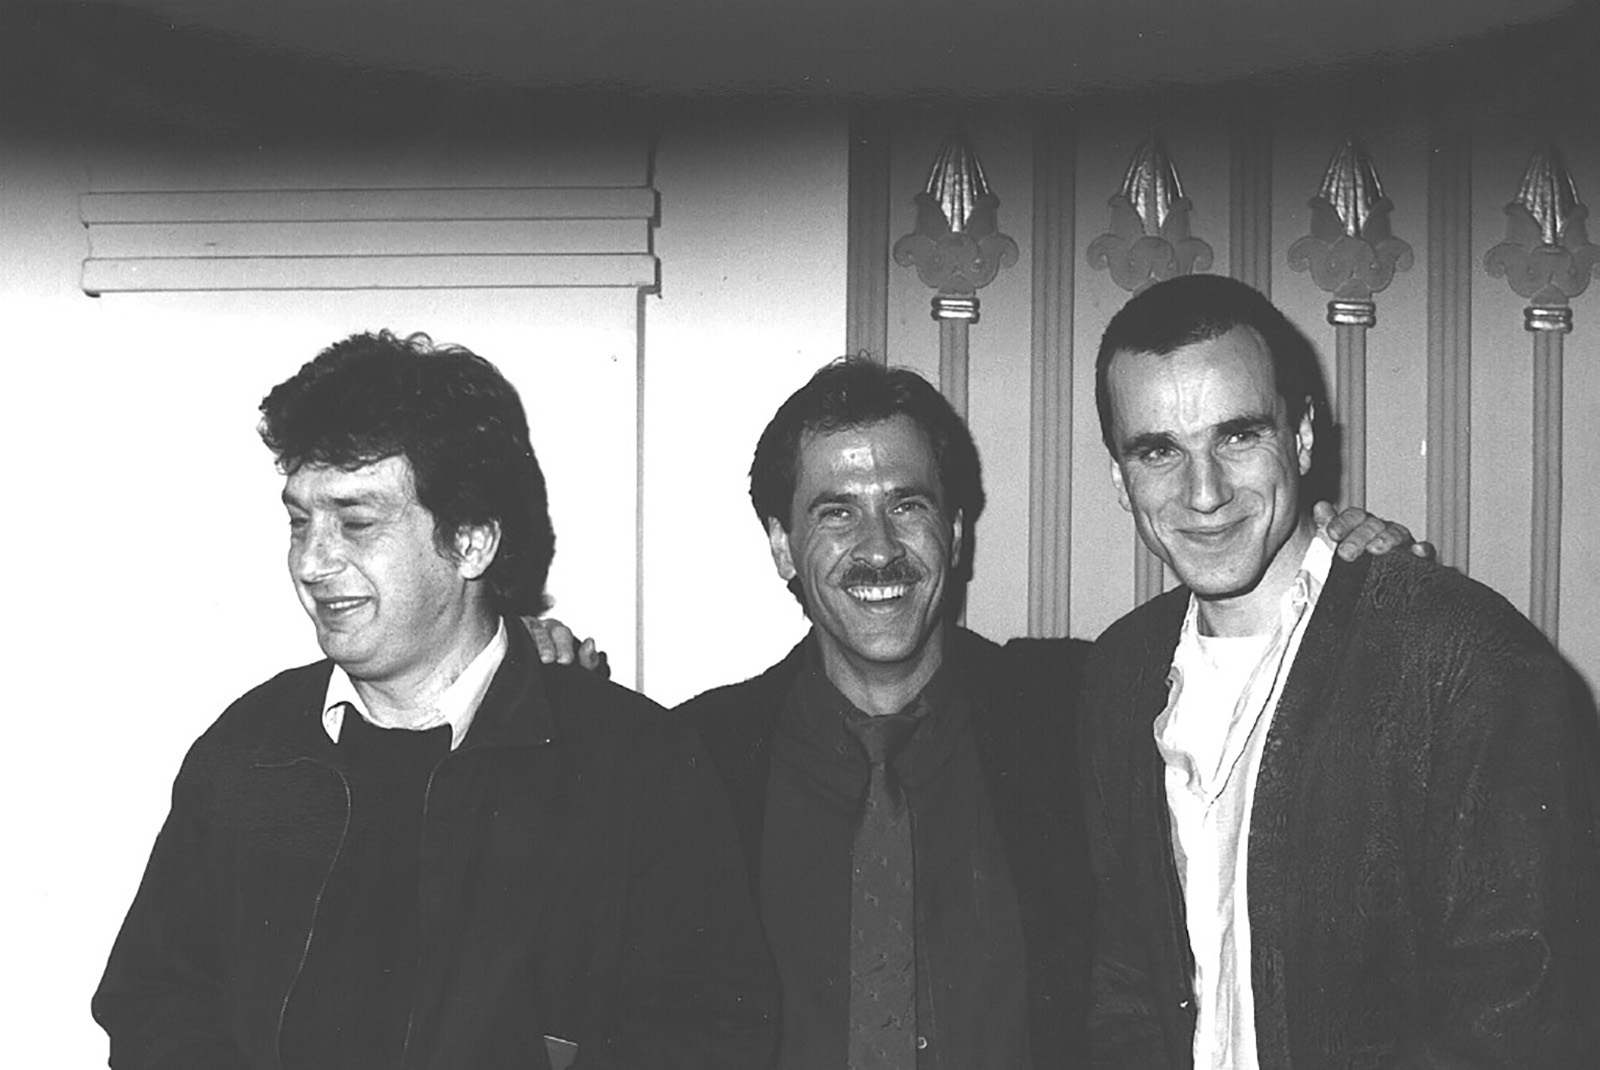 Festival Founder, Dan Ireland, poses between screenwriter, Hanif Kureishi and actor, Daniel Day-Lewis, in town for their film, My Beautiful Laundrette